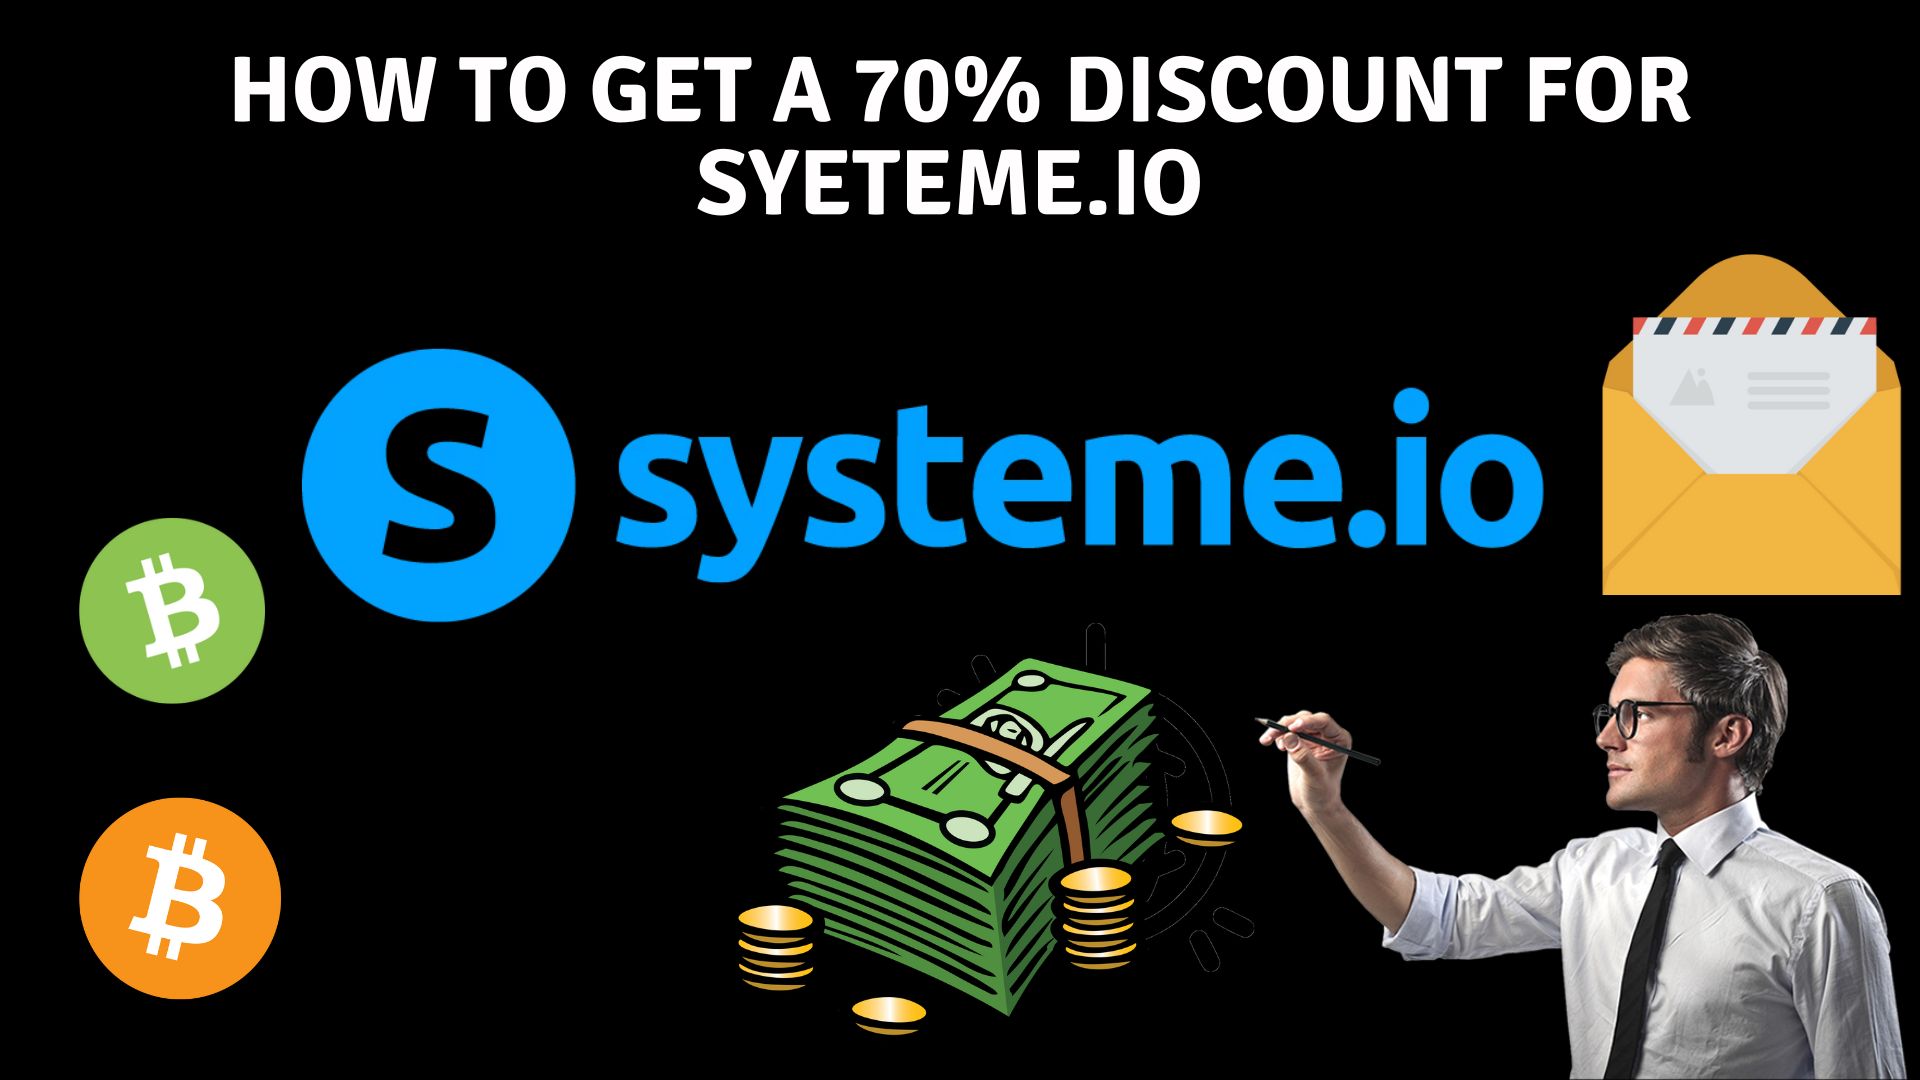 How to get a 70% discount for syeteme. Io